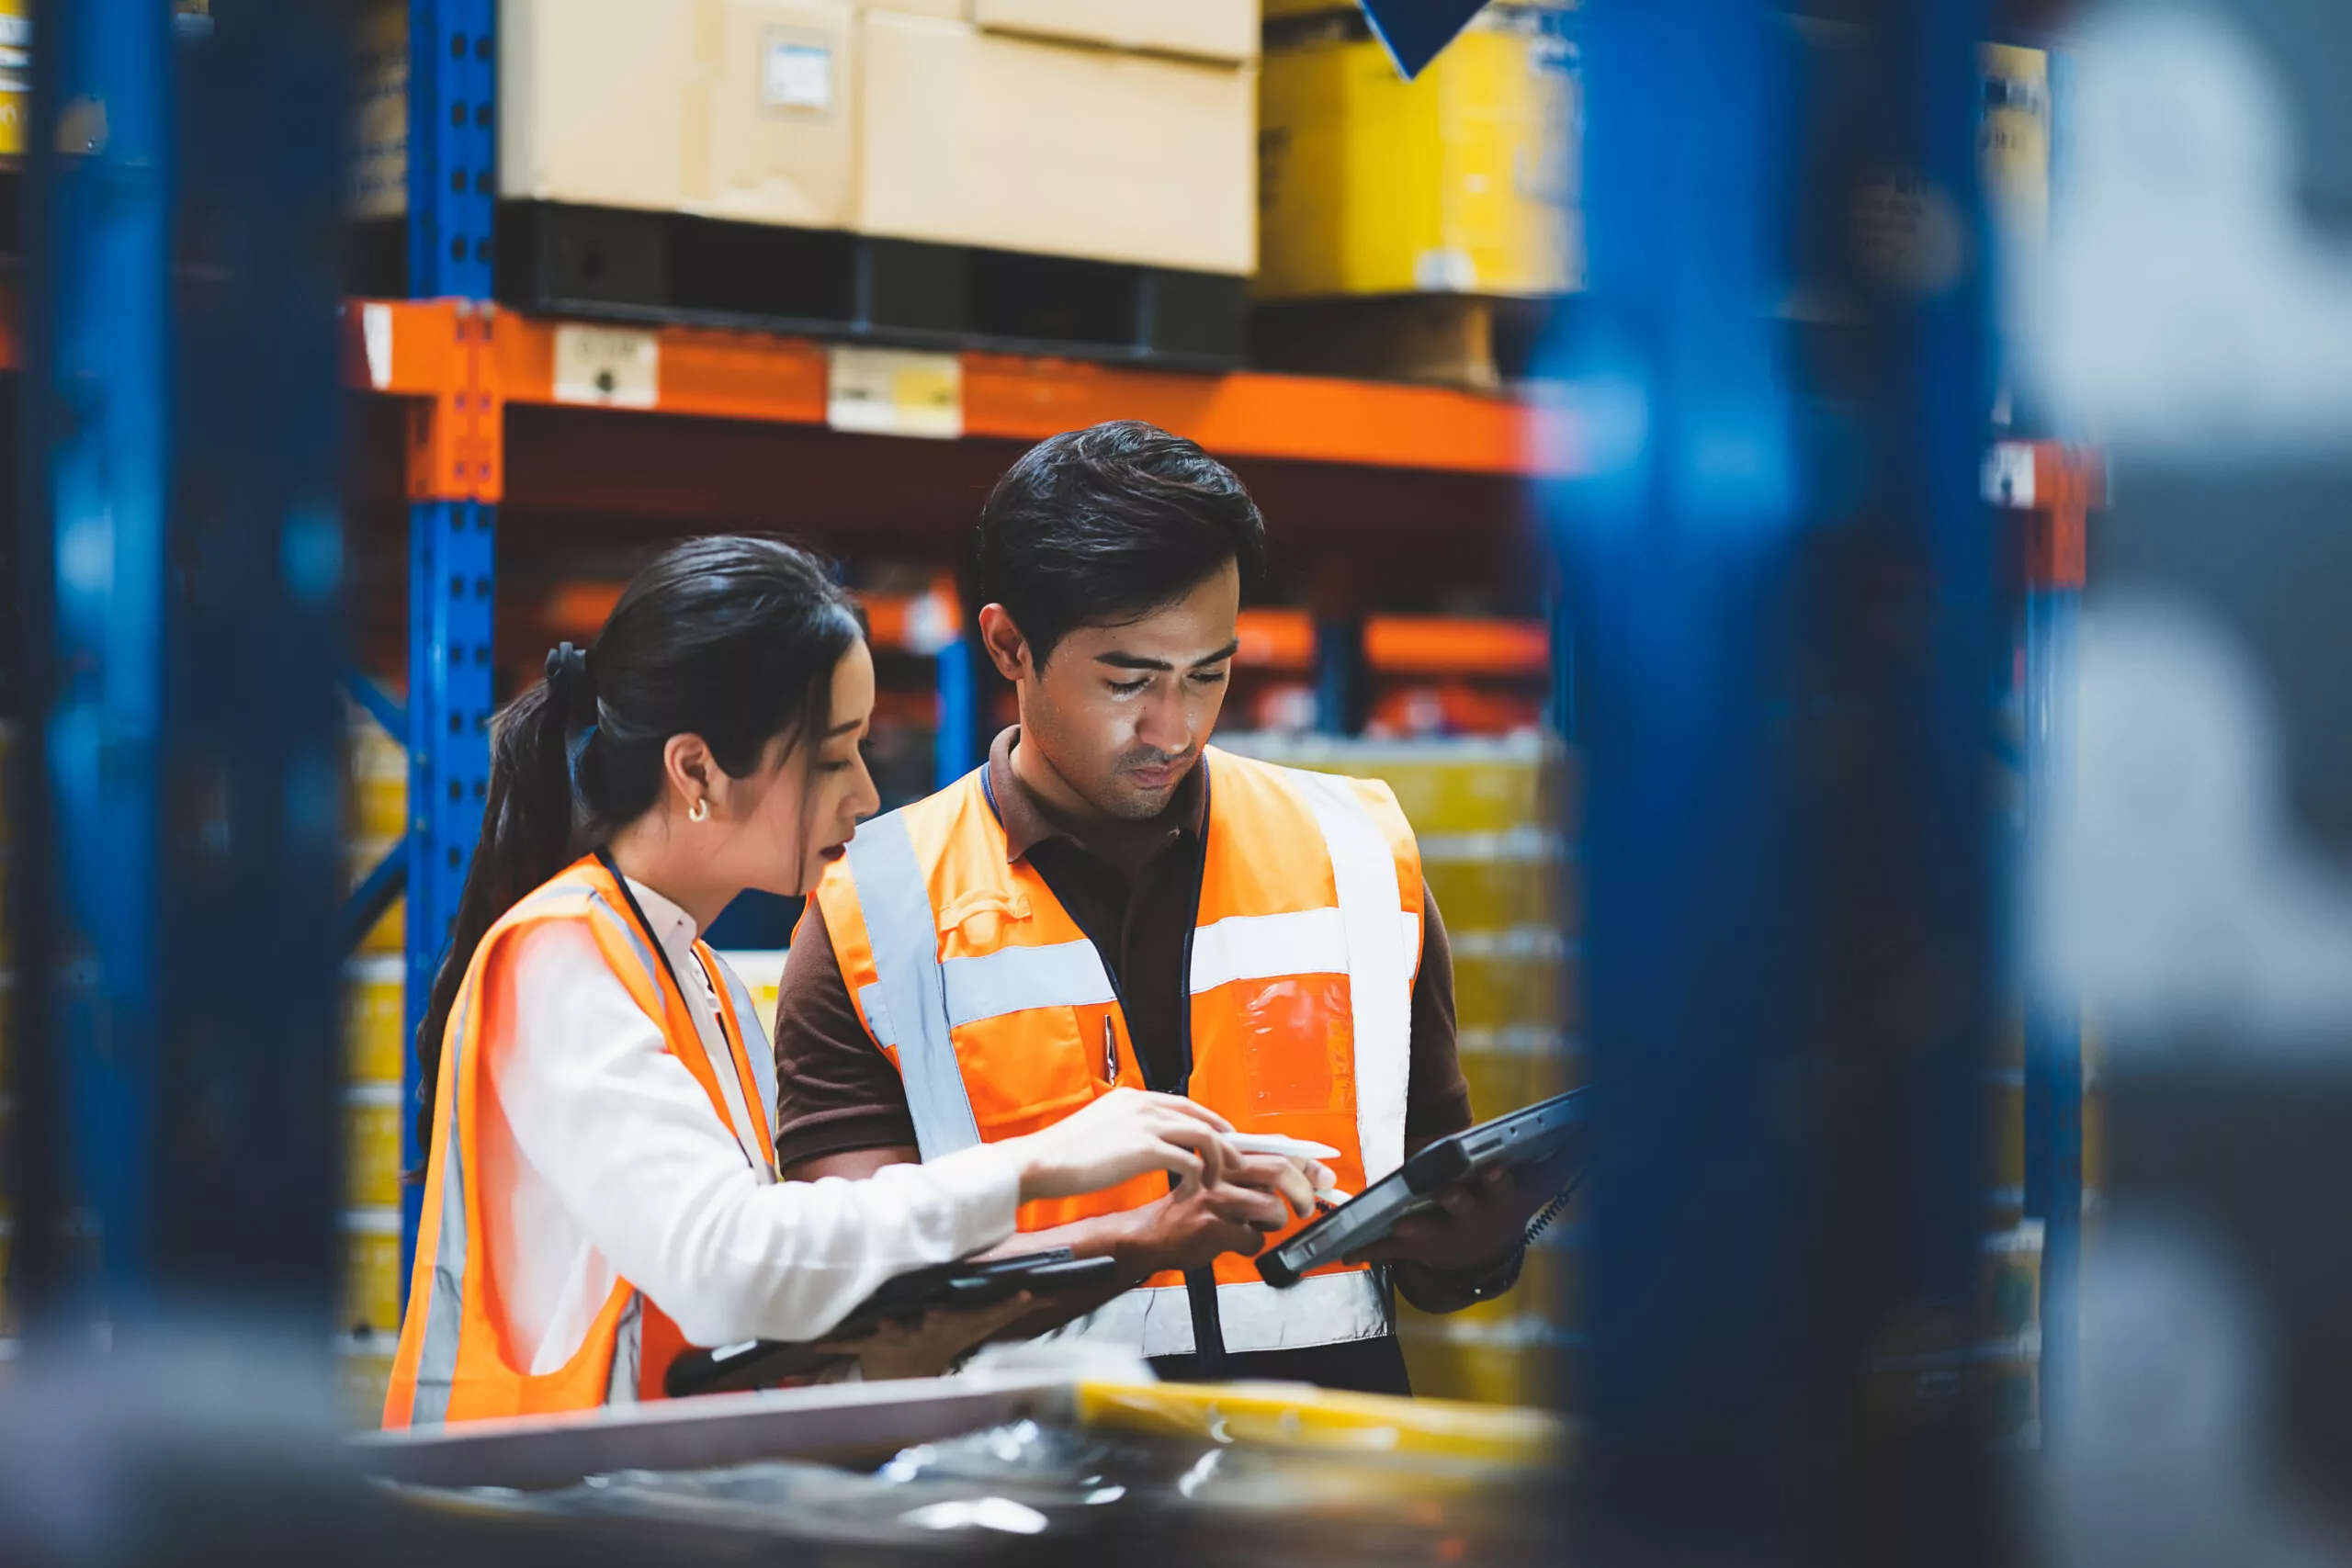 warehouse worker and manager checks stock and inventory using a tablet device